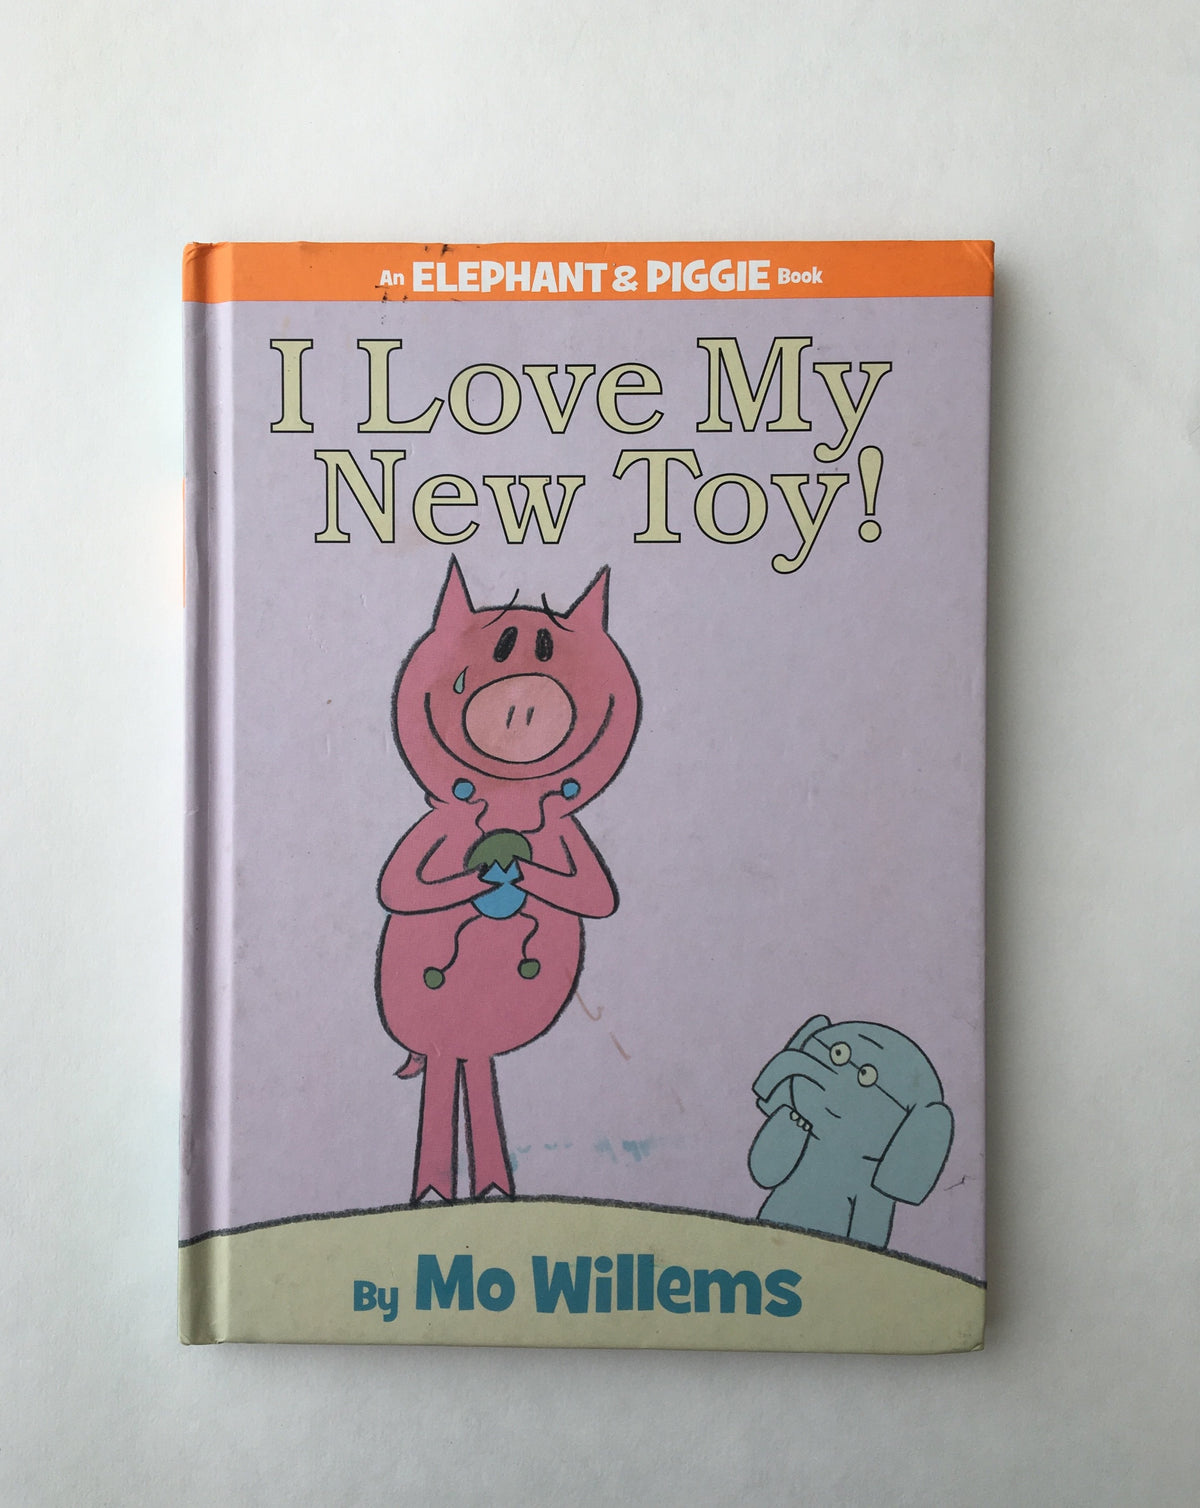 I Love My New Toy by Mo Willems